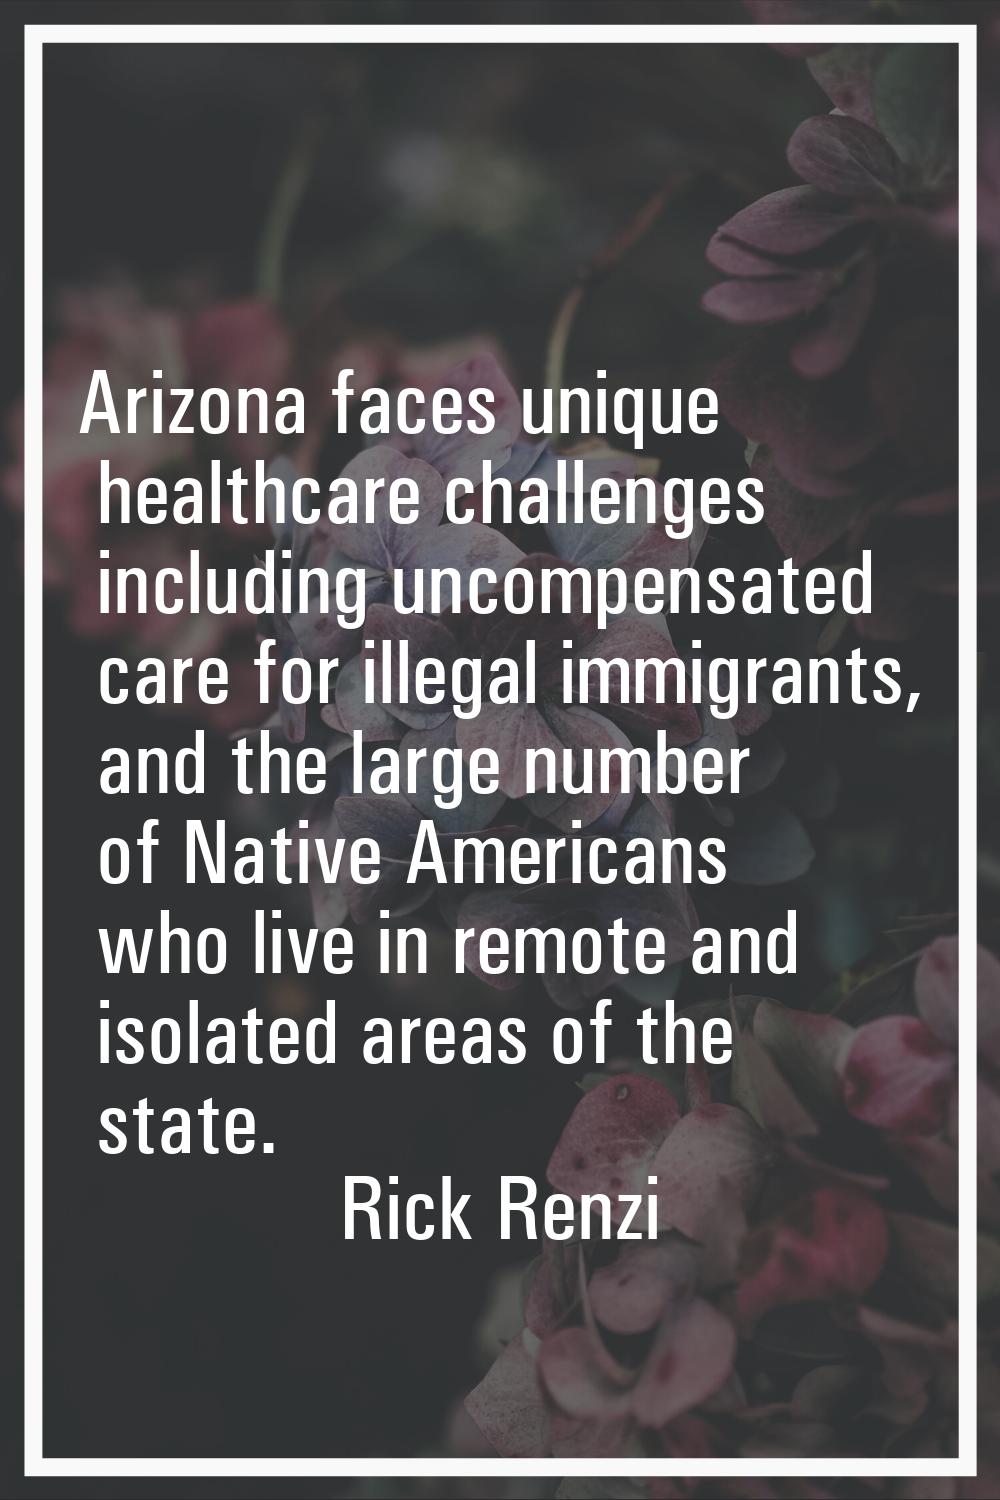 Arizona faces unique healthcare challenges including uncompensated care for illegal immigrants, and